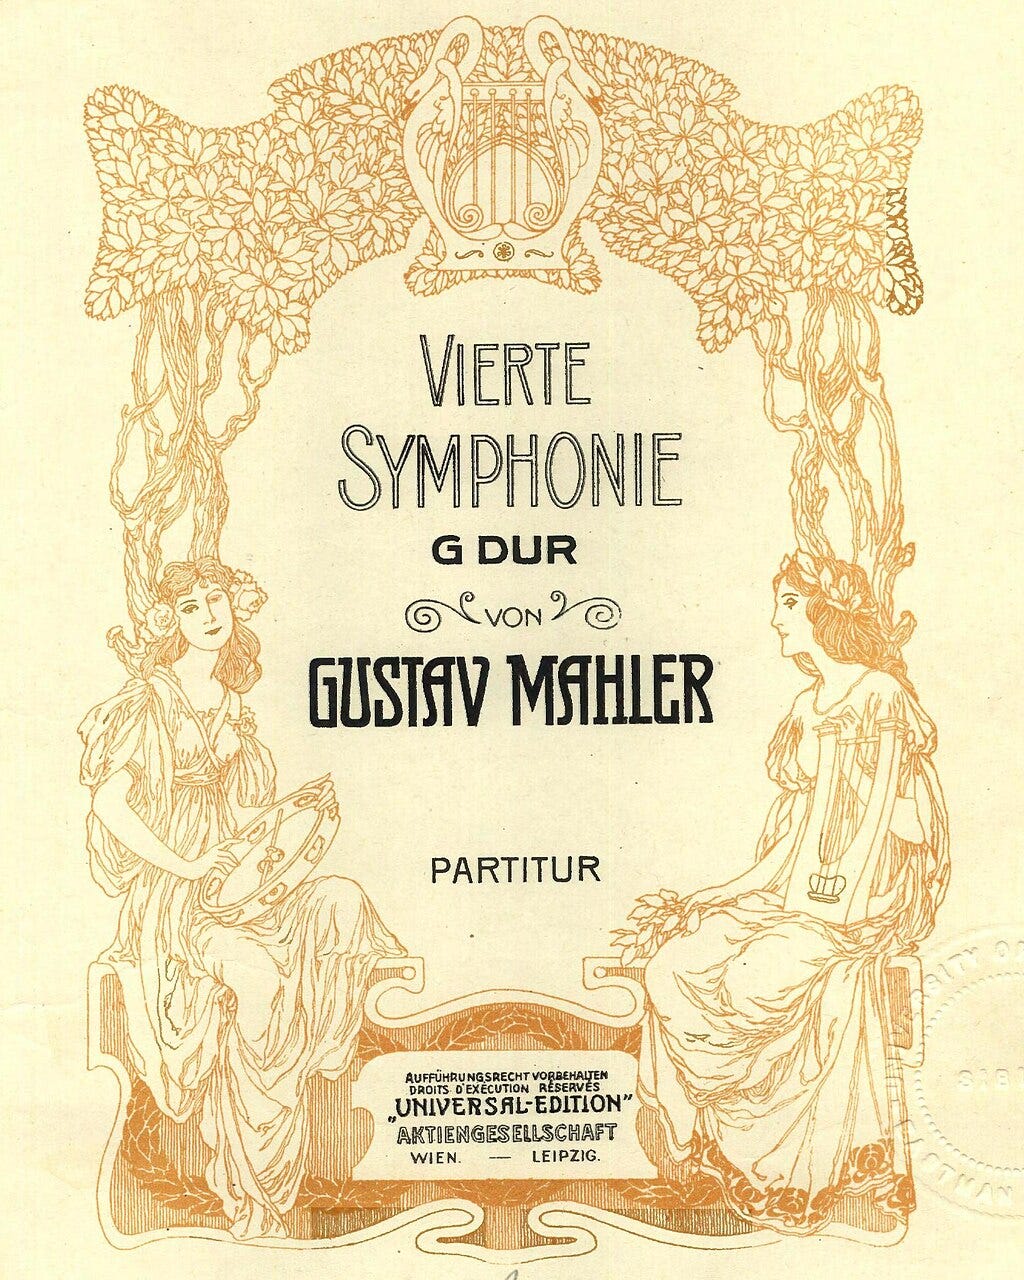 Symphony No.4 by Gustav Mahler, score cover of Universal Edition (plate number U.E. 2944.